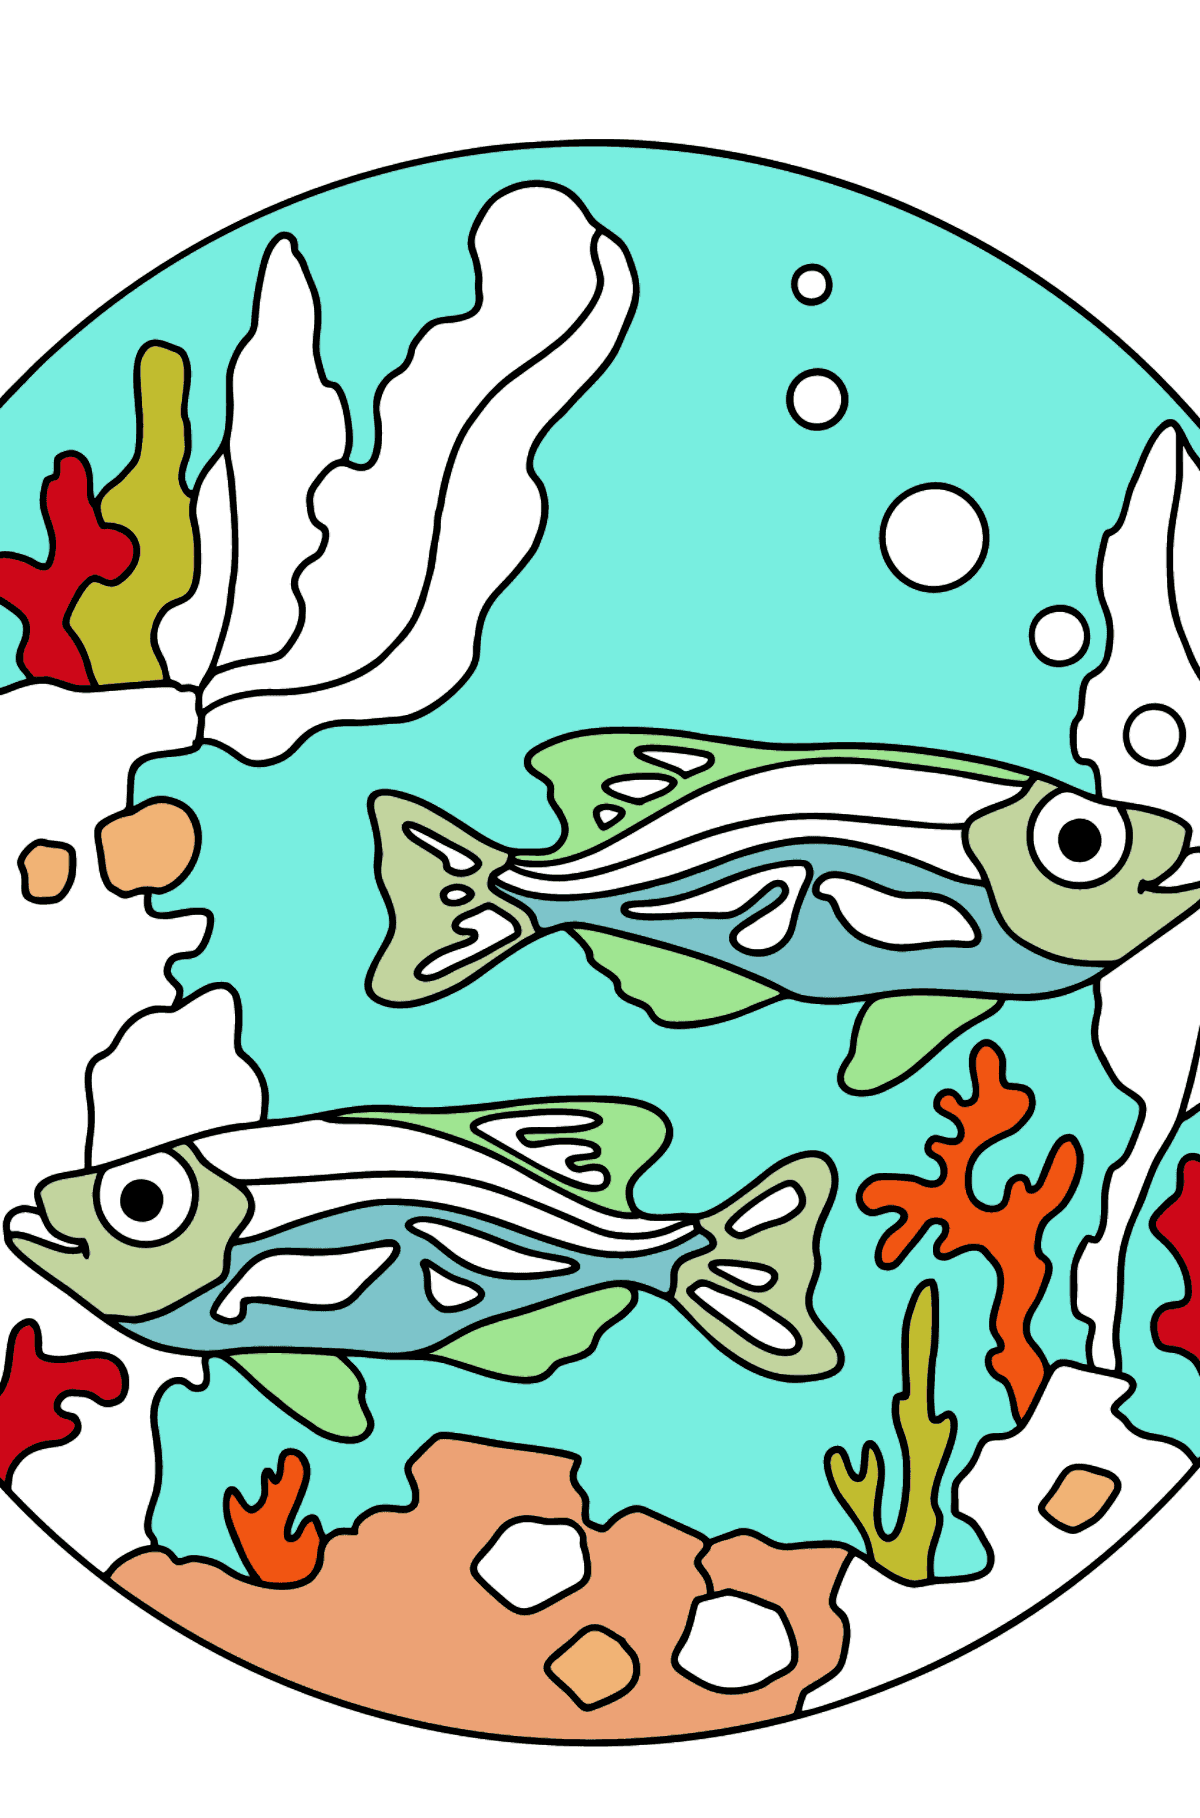 Two Fish Coloring Page - Fish are Swimming Beautifully - Coloring Pages for Kids